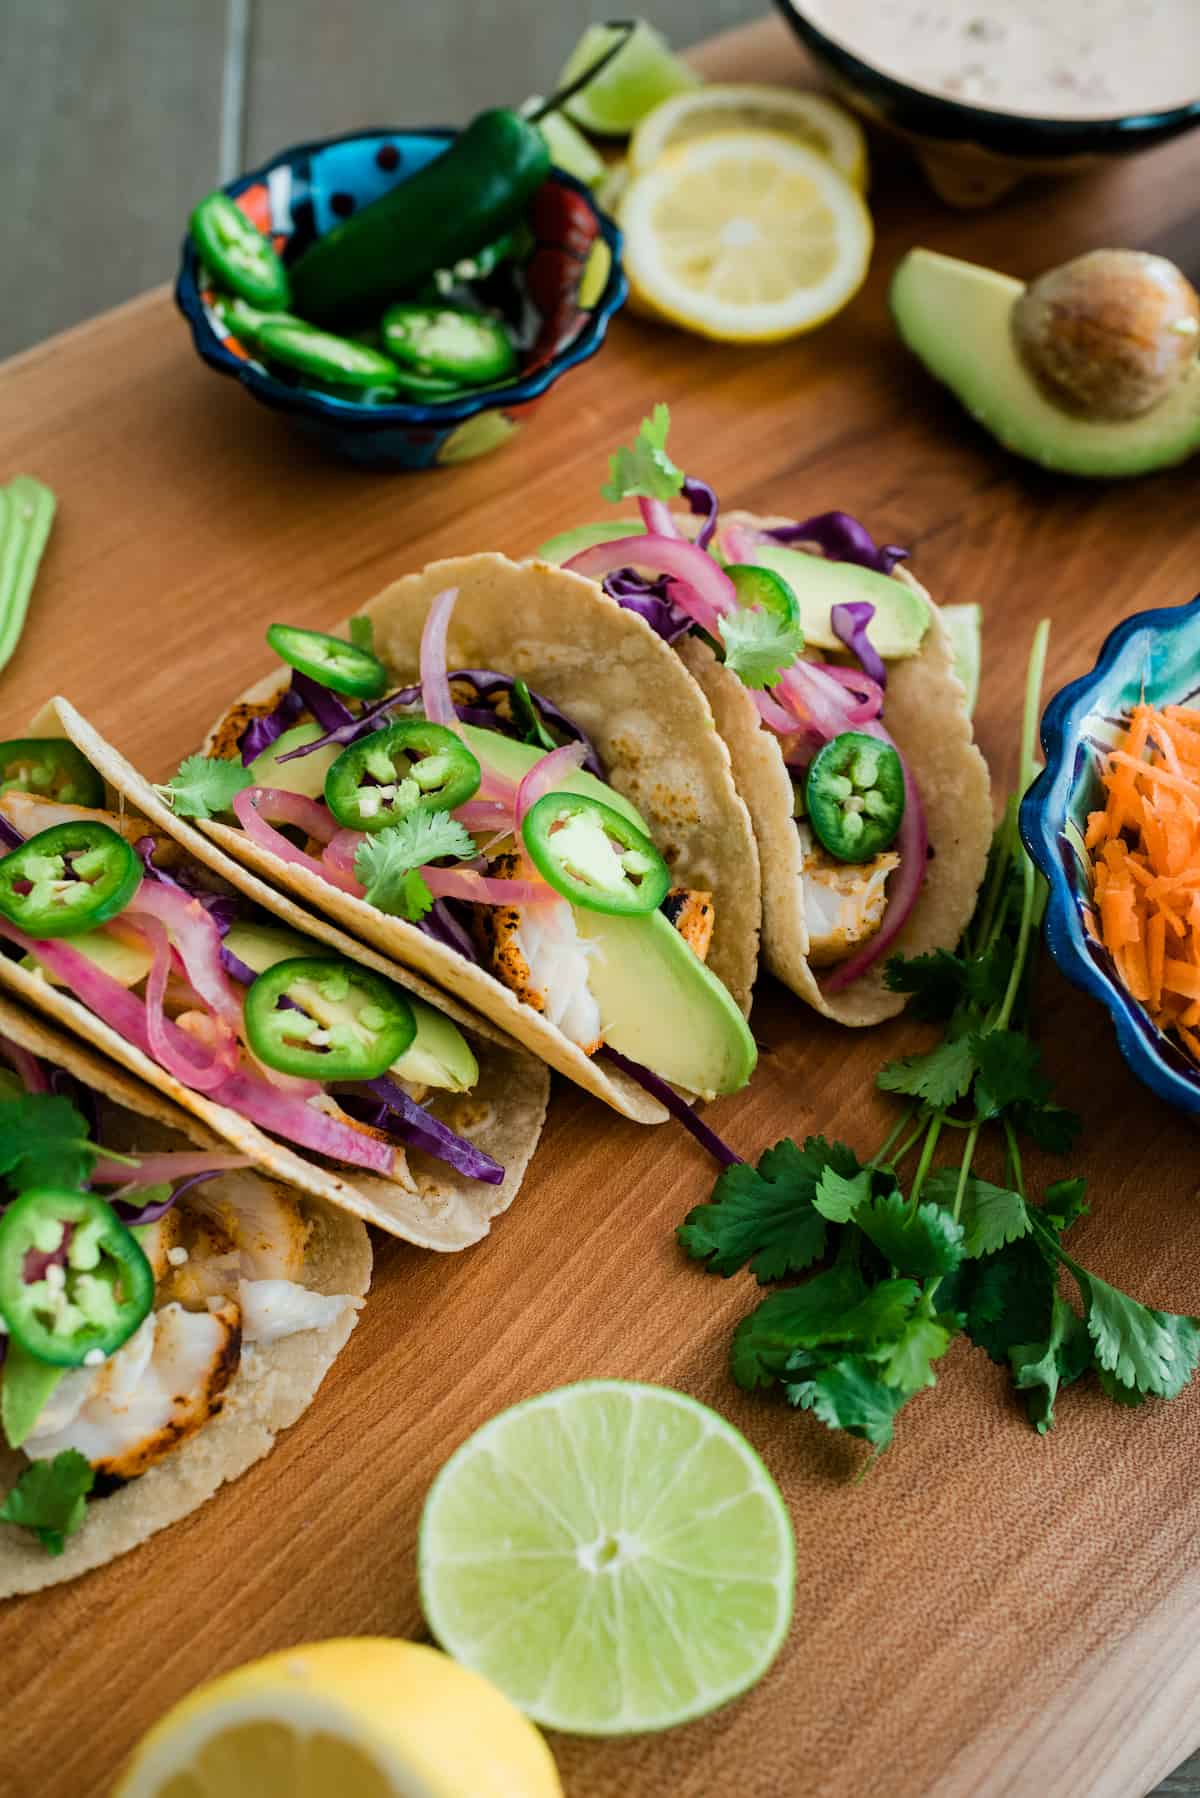 Lemon butter tilapia tacos beautifully presented on a wooden board.